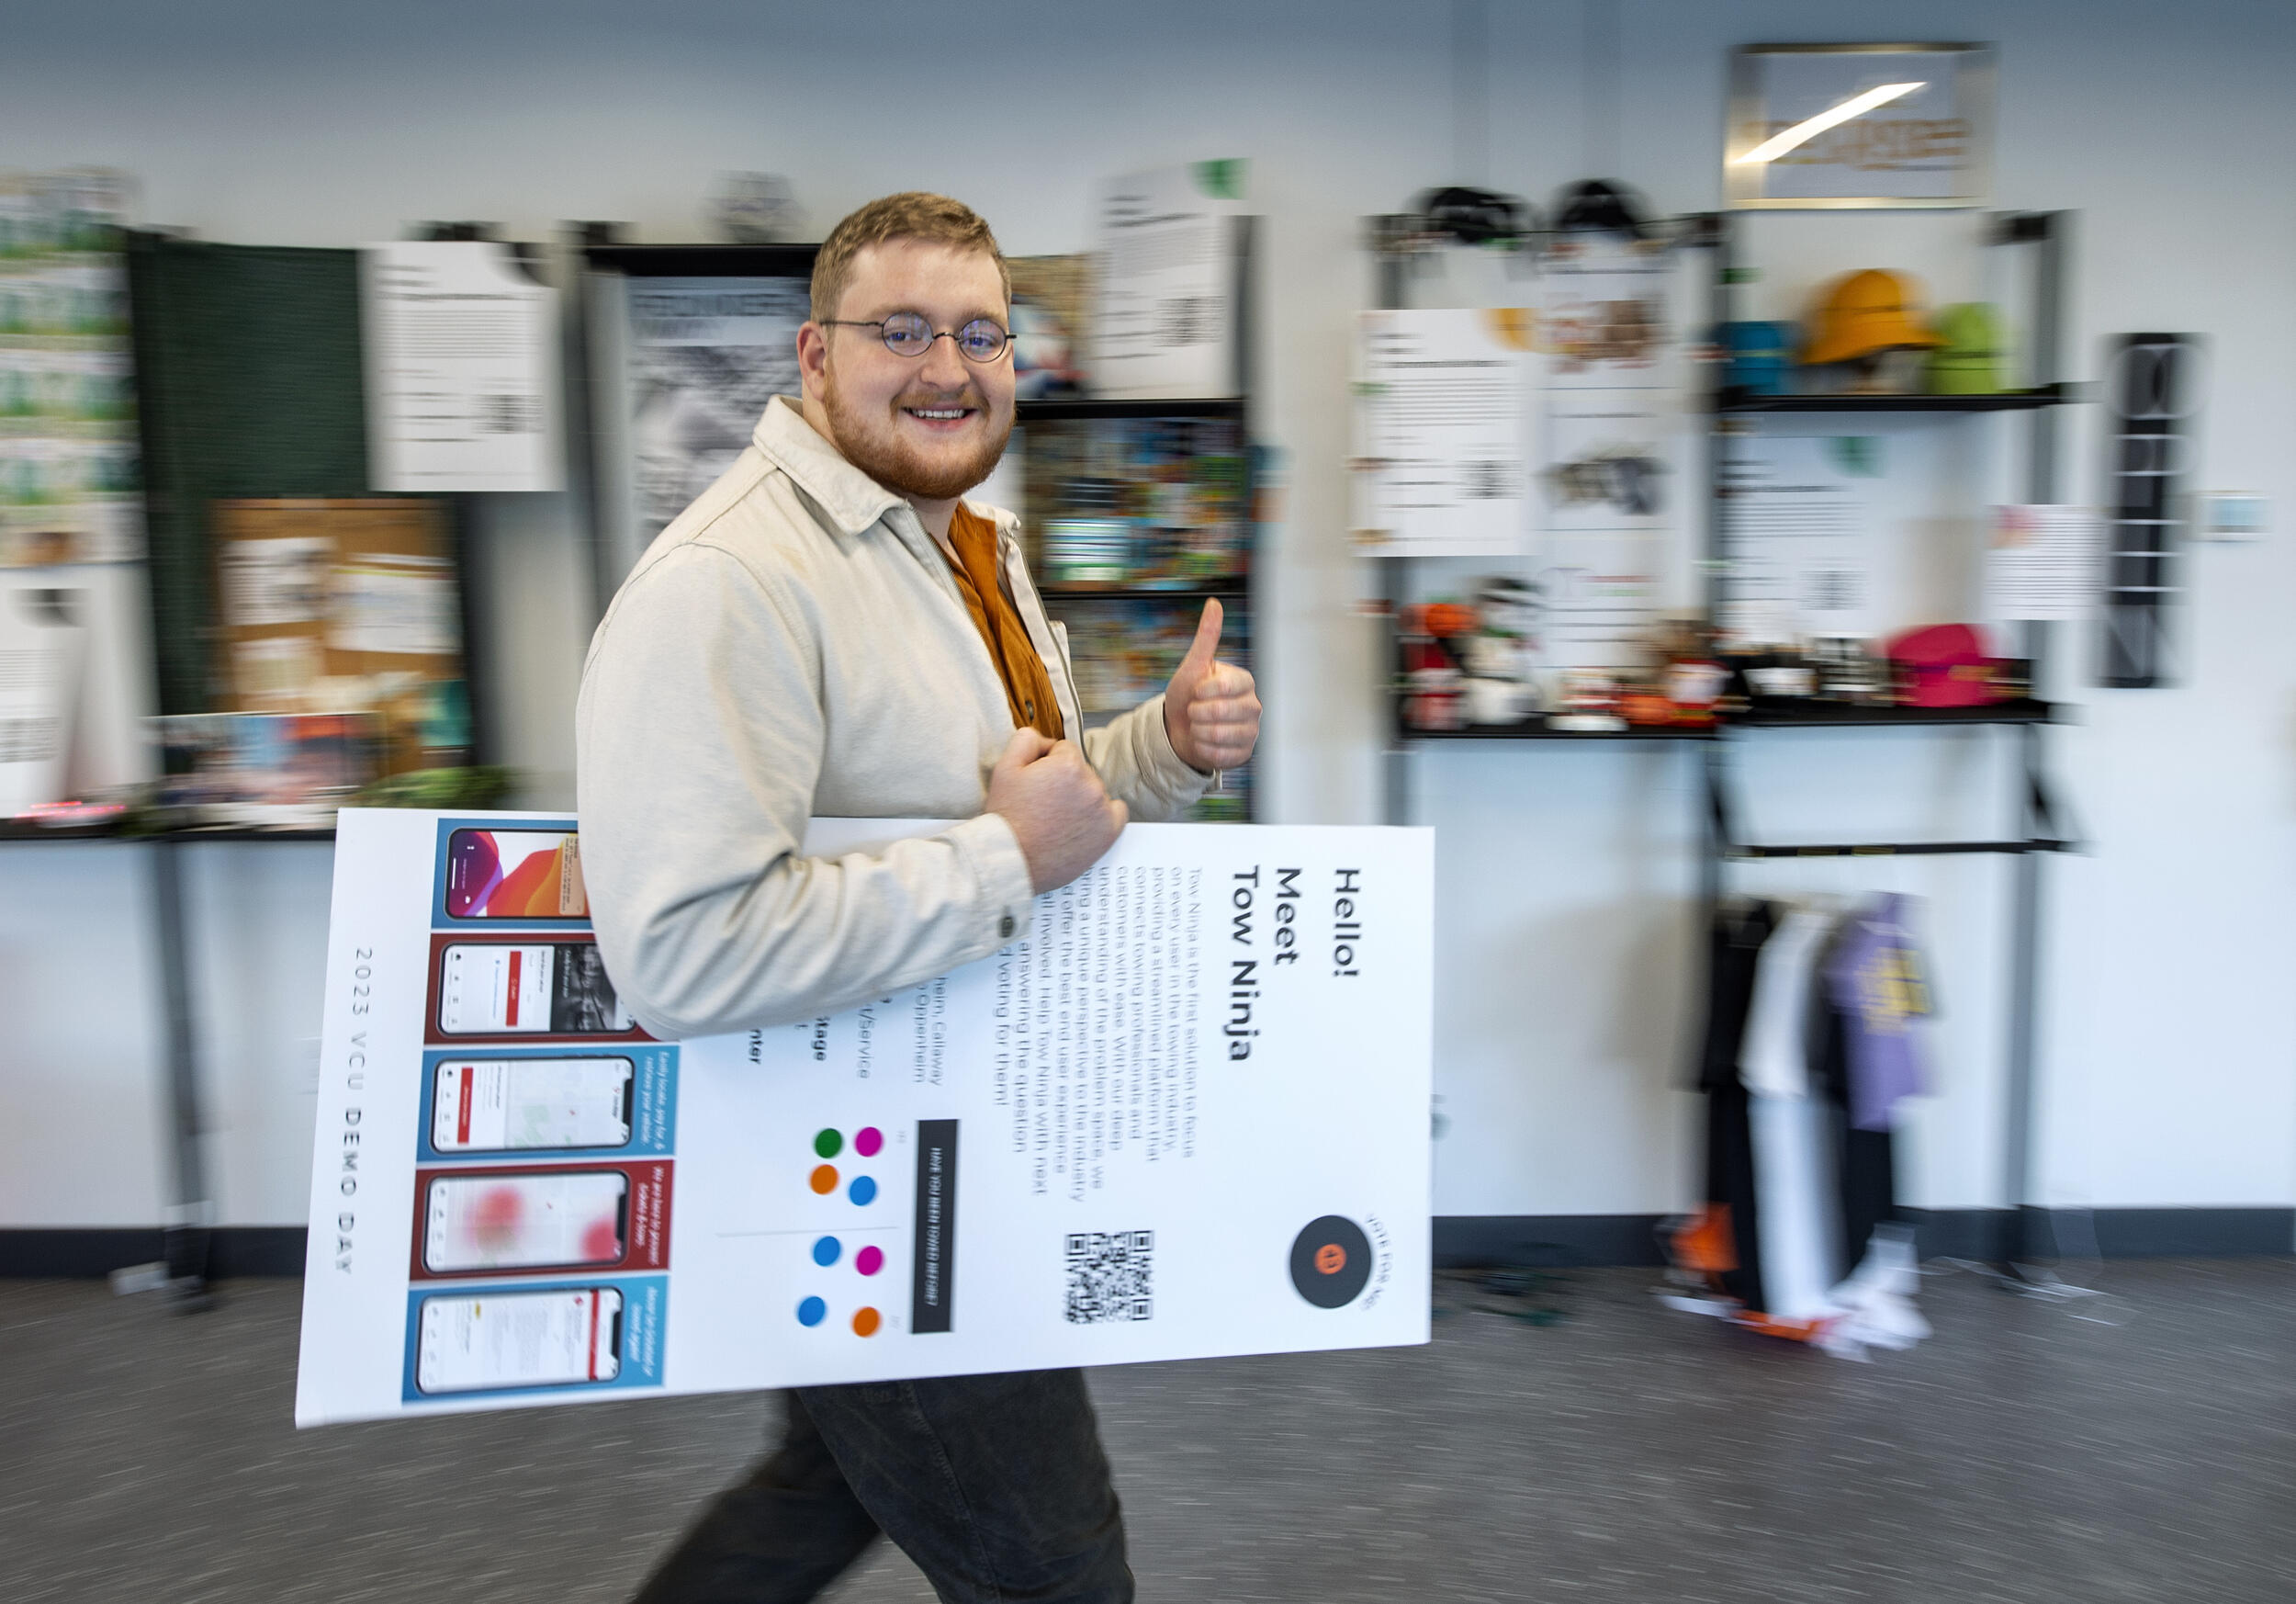 A photo of a man walking with a poster under his arm while giving a thumbs up 